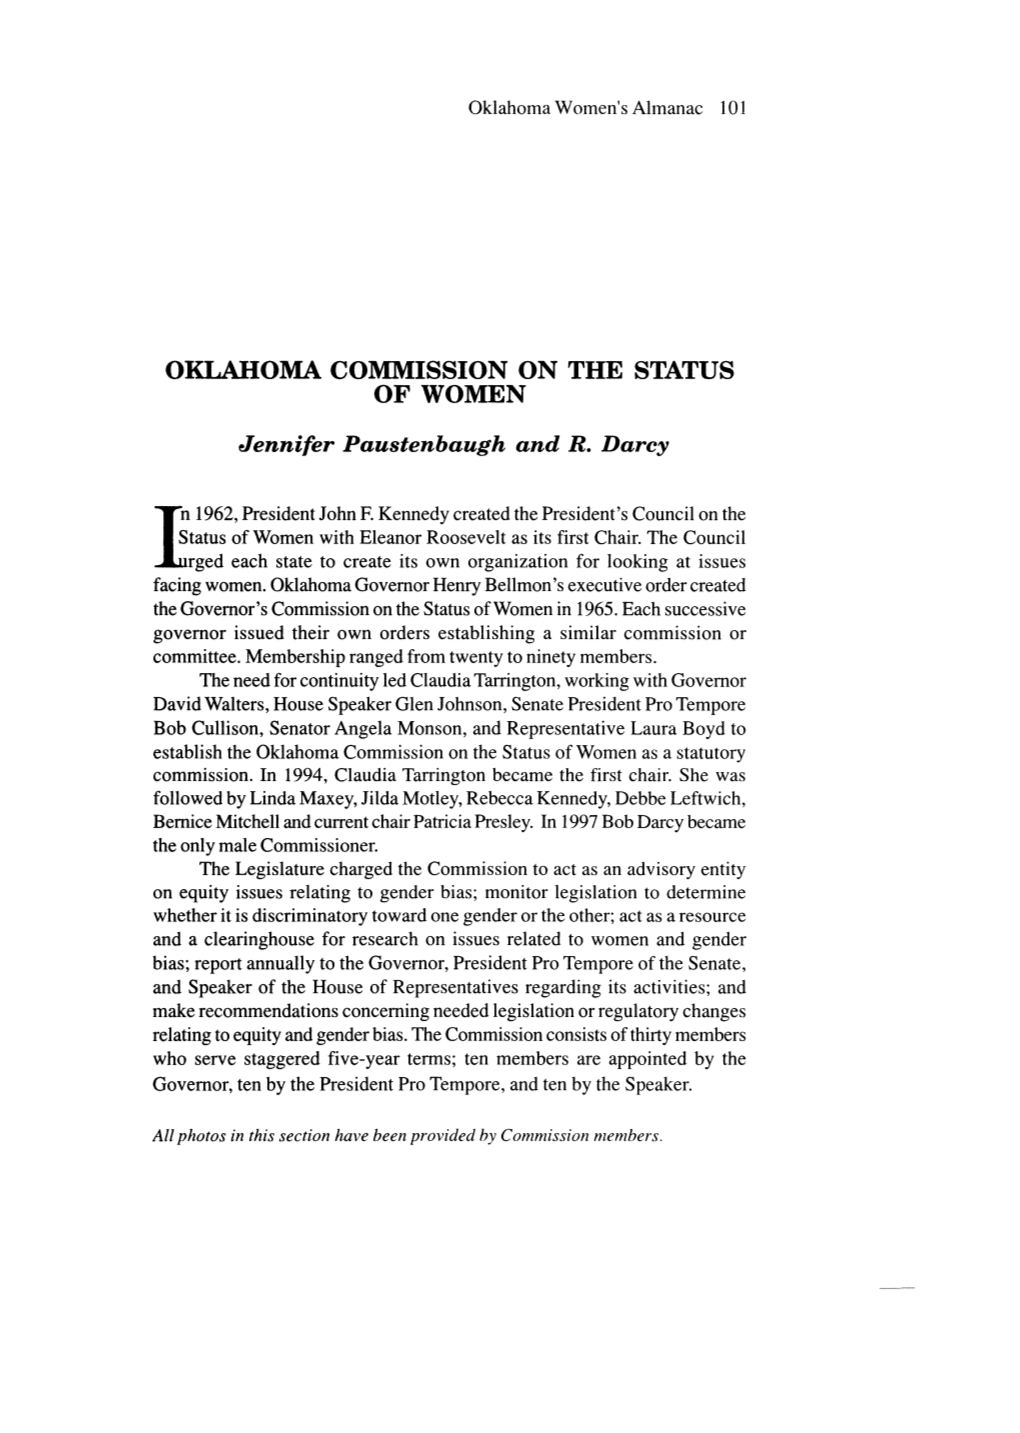 Oklahoma Commission on the Status of Women